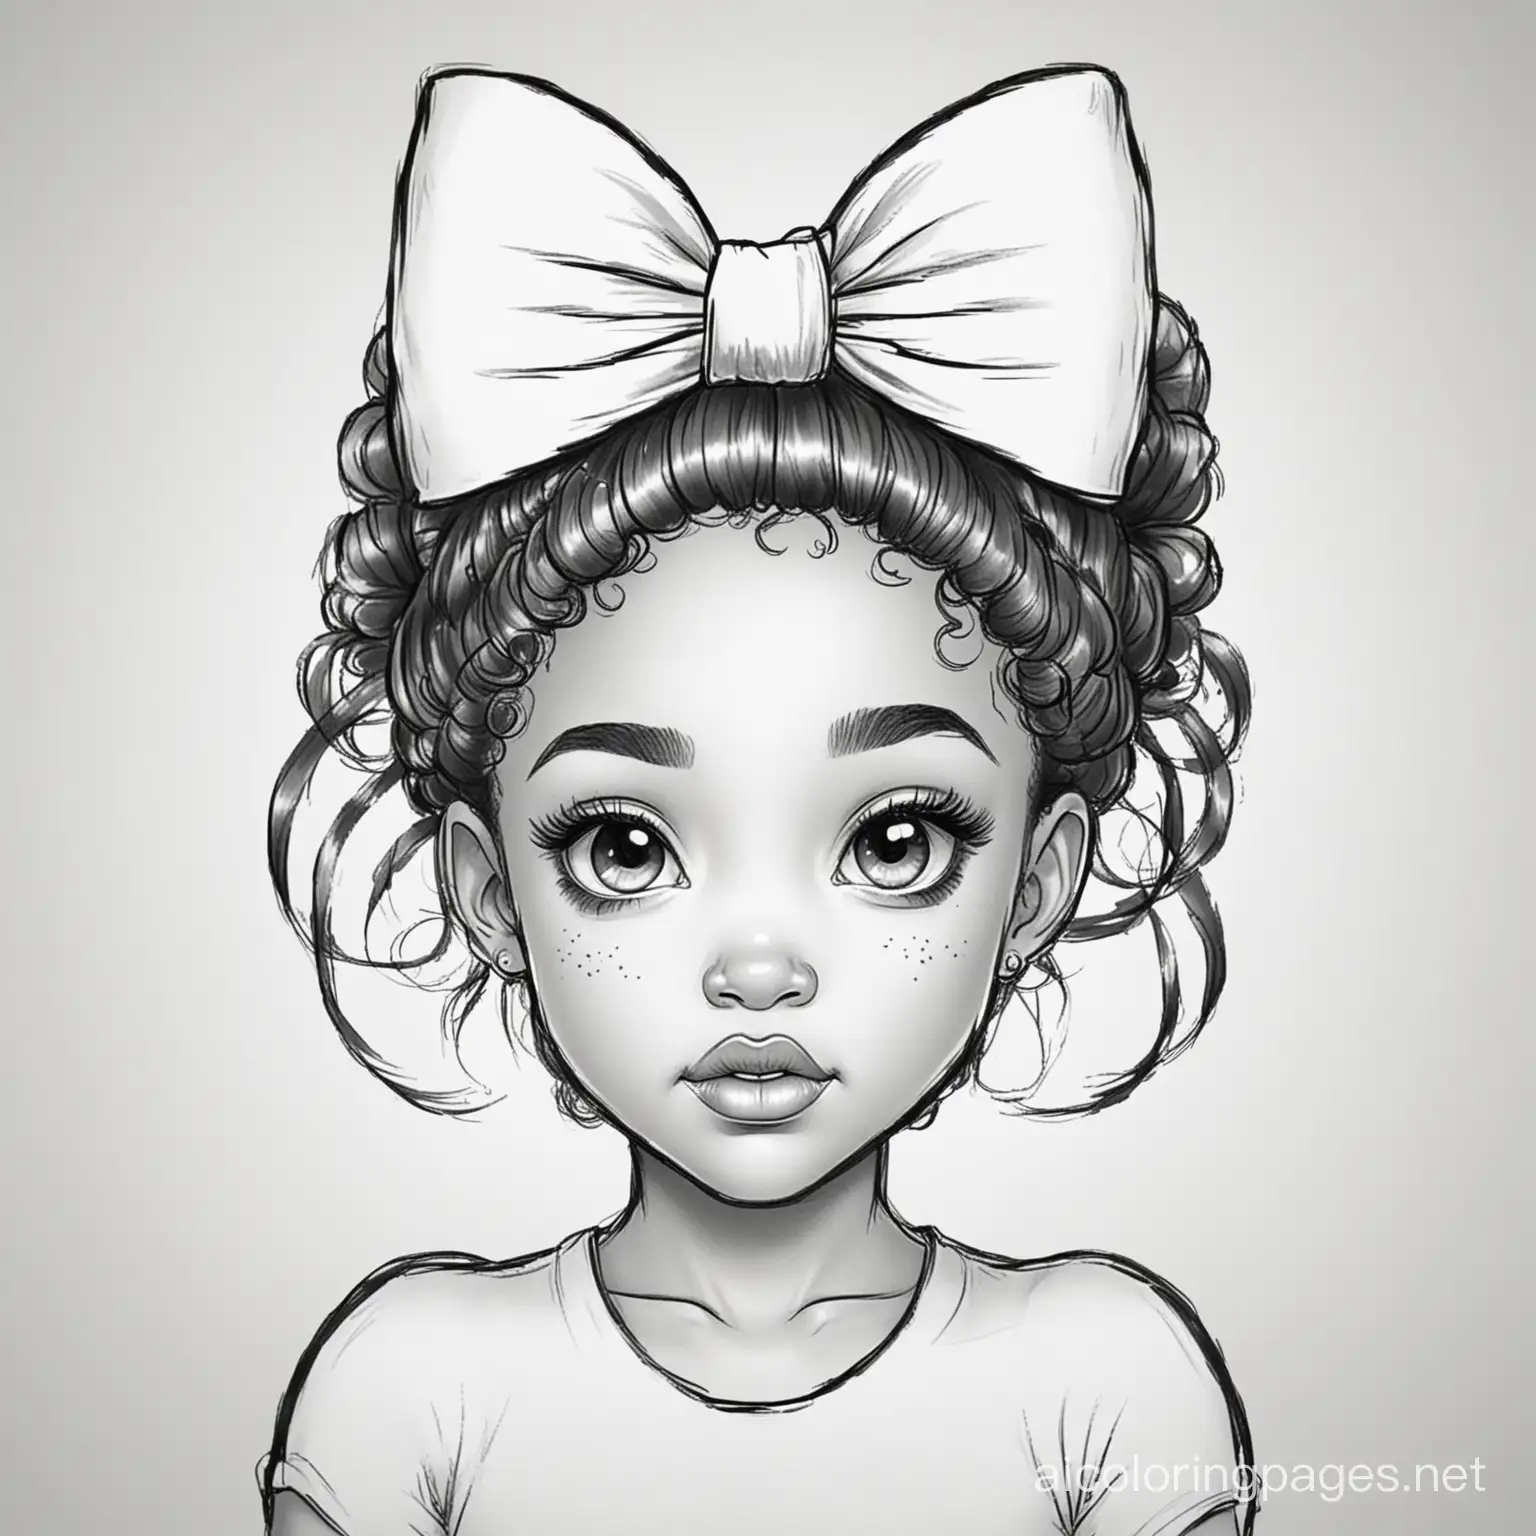 Black girl with a Christmas bow in her hair, Coloring Page, black and white, line art, white background, Simplicity, Ample White Space. The background of the coloring page is plain white to make it easy for young children to color within the lines. The outlines of all the subjects are easy to distinguish, making it simple for kids to color without too much difficulty